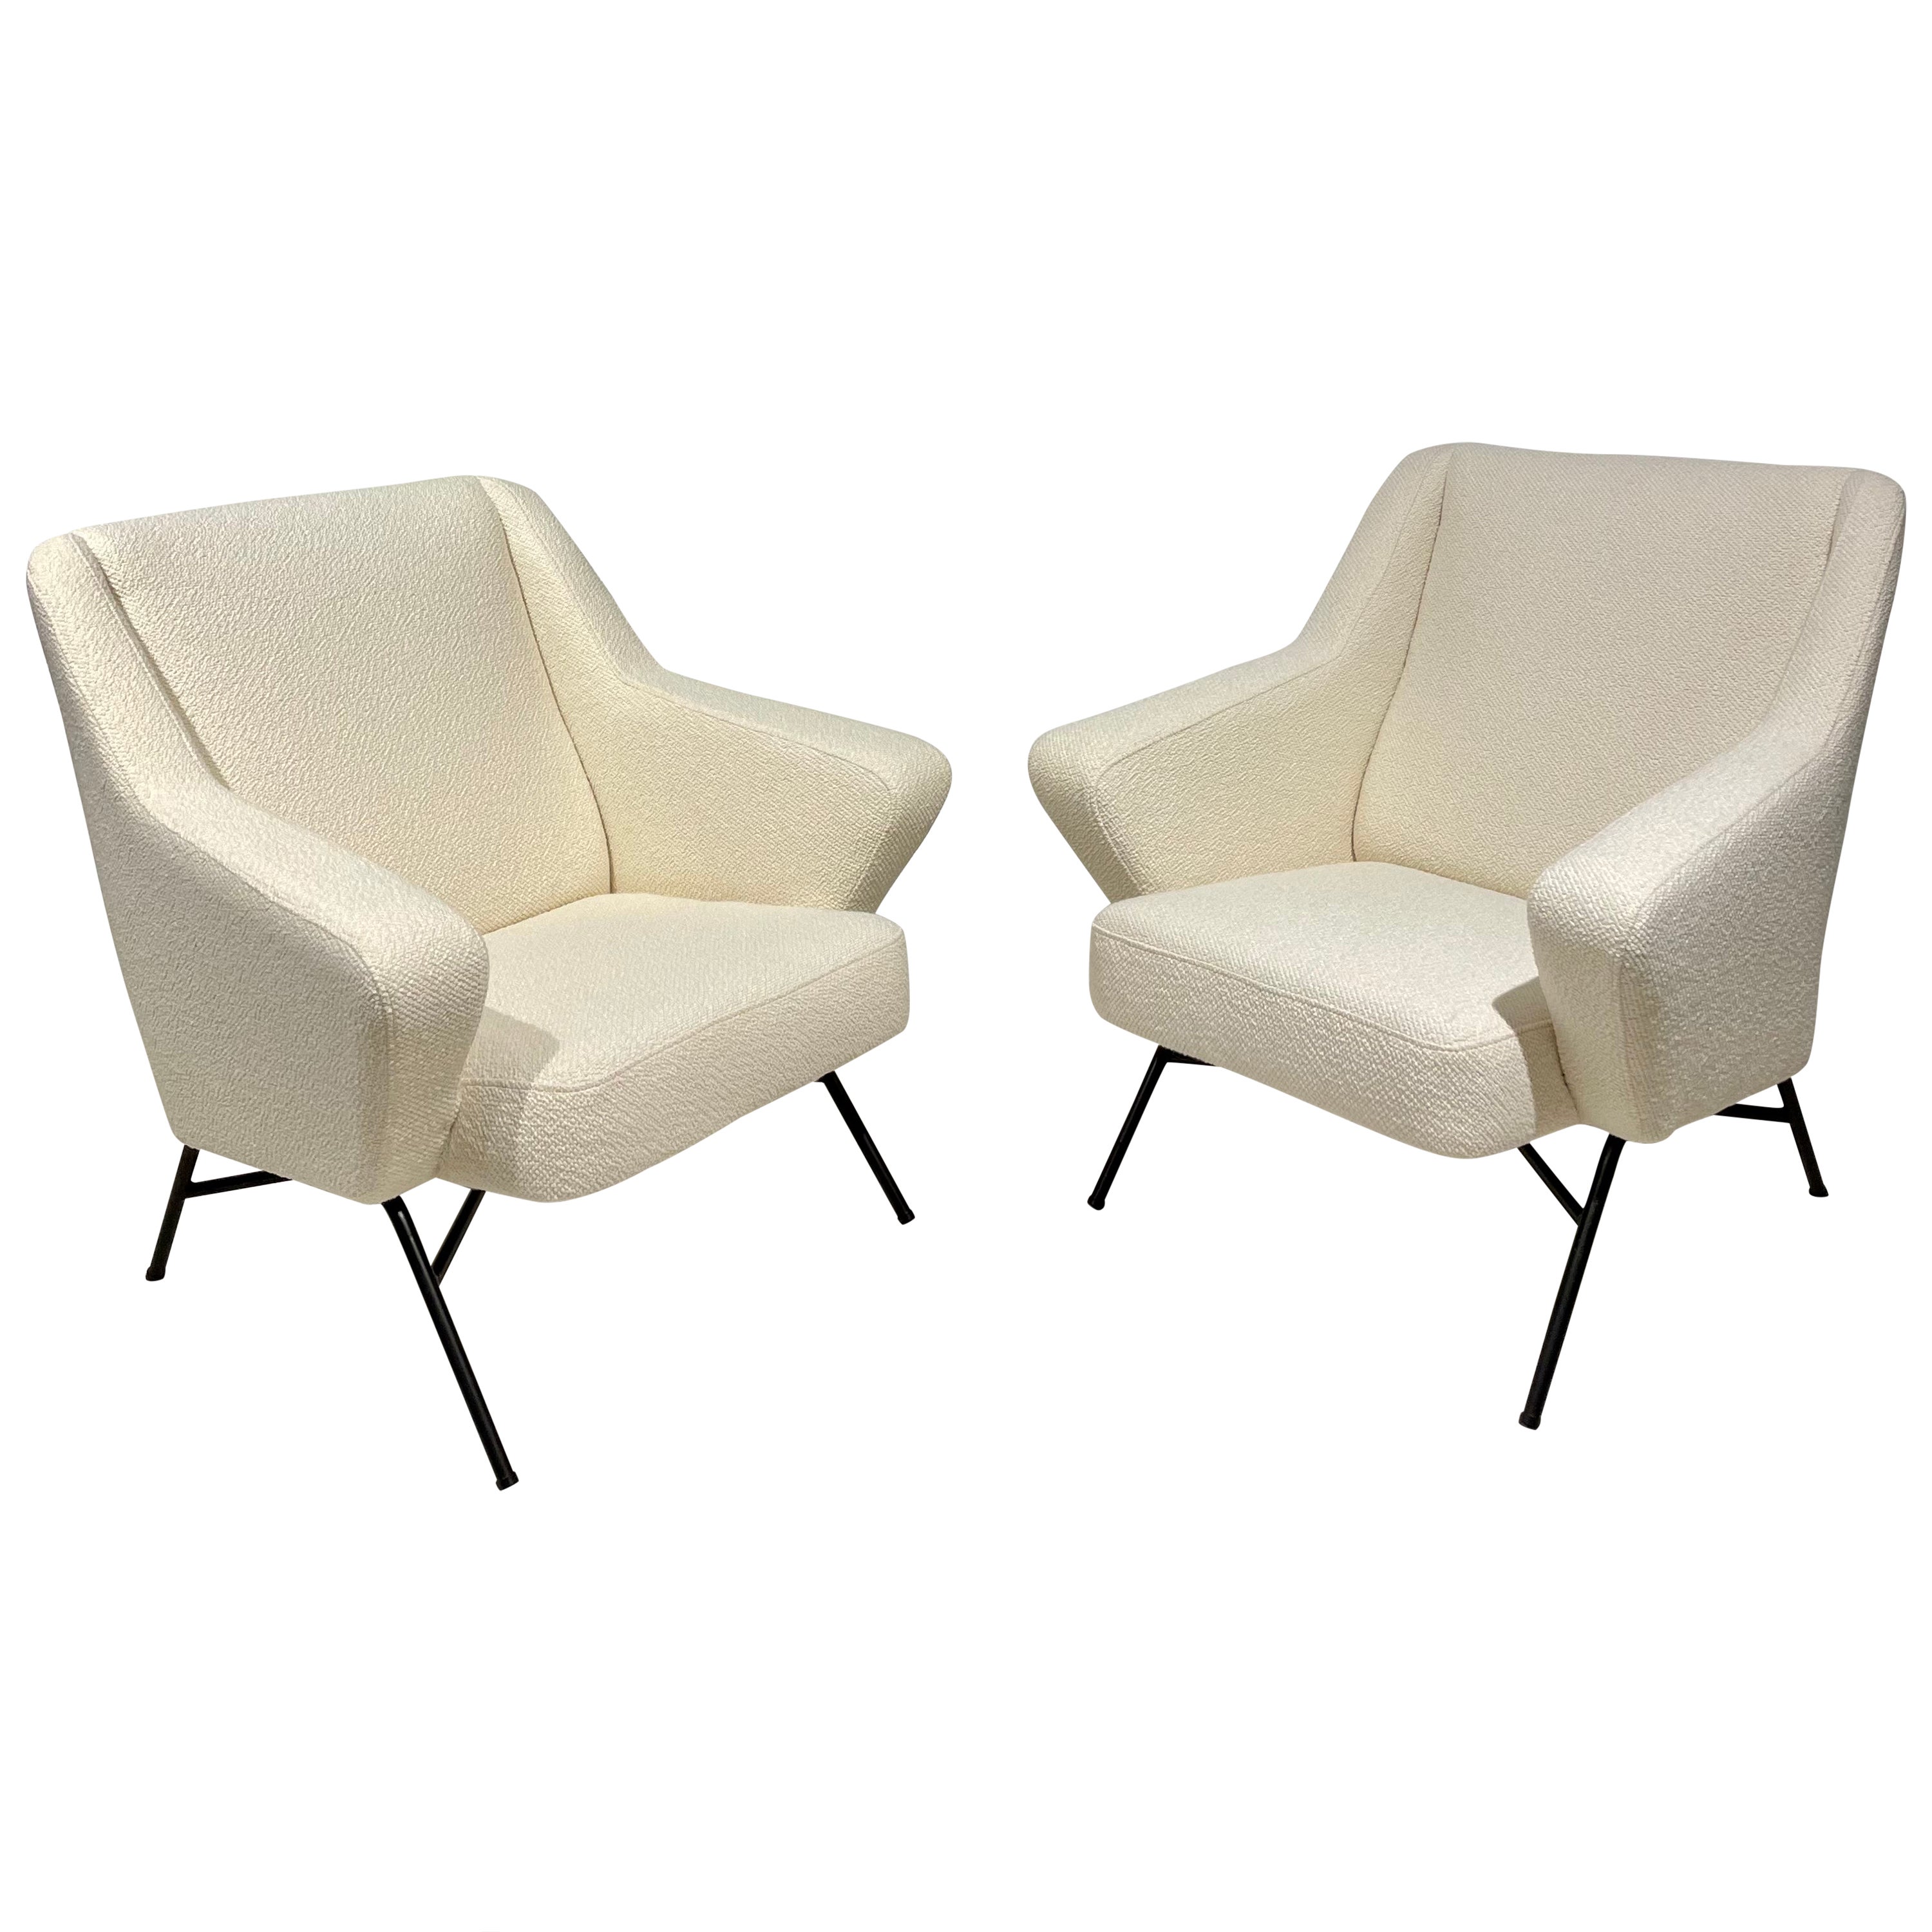 Pair of Armchairs Editor by Burov, 1950 For Sale